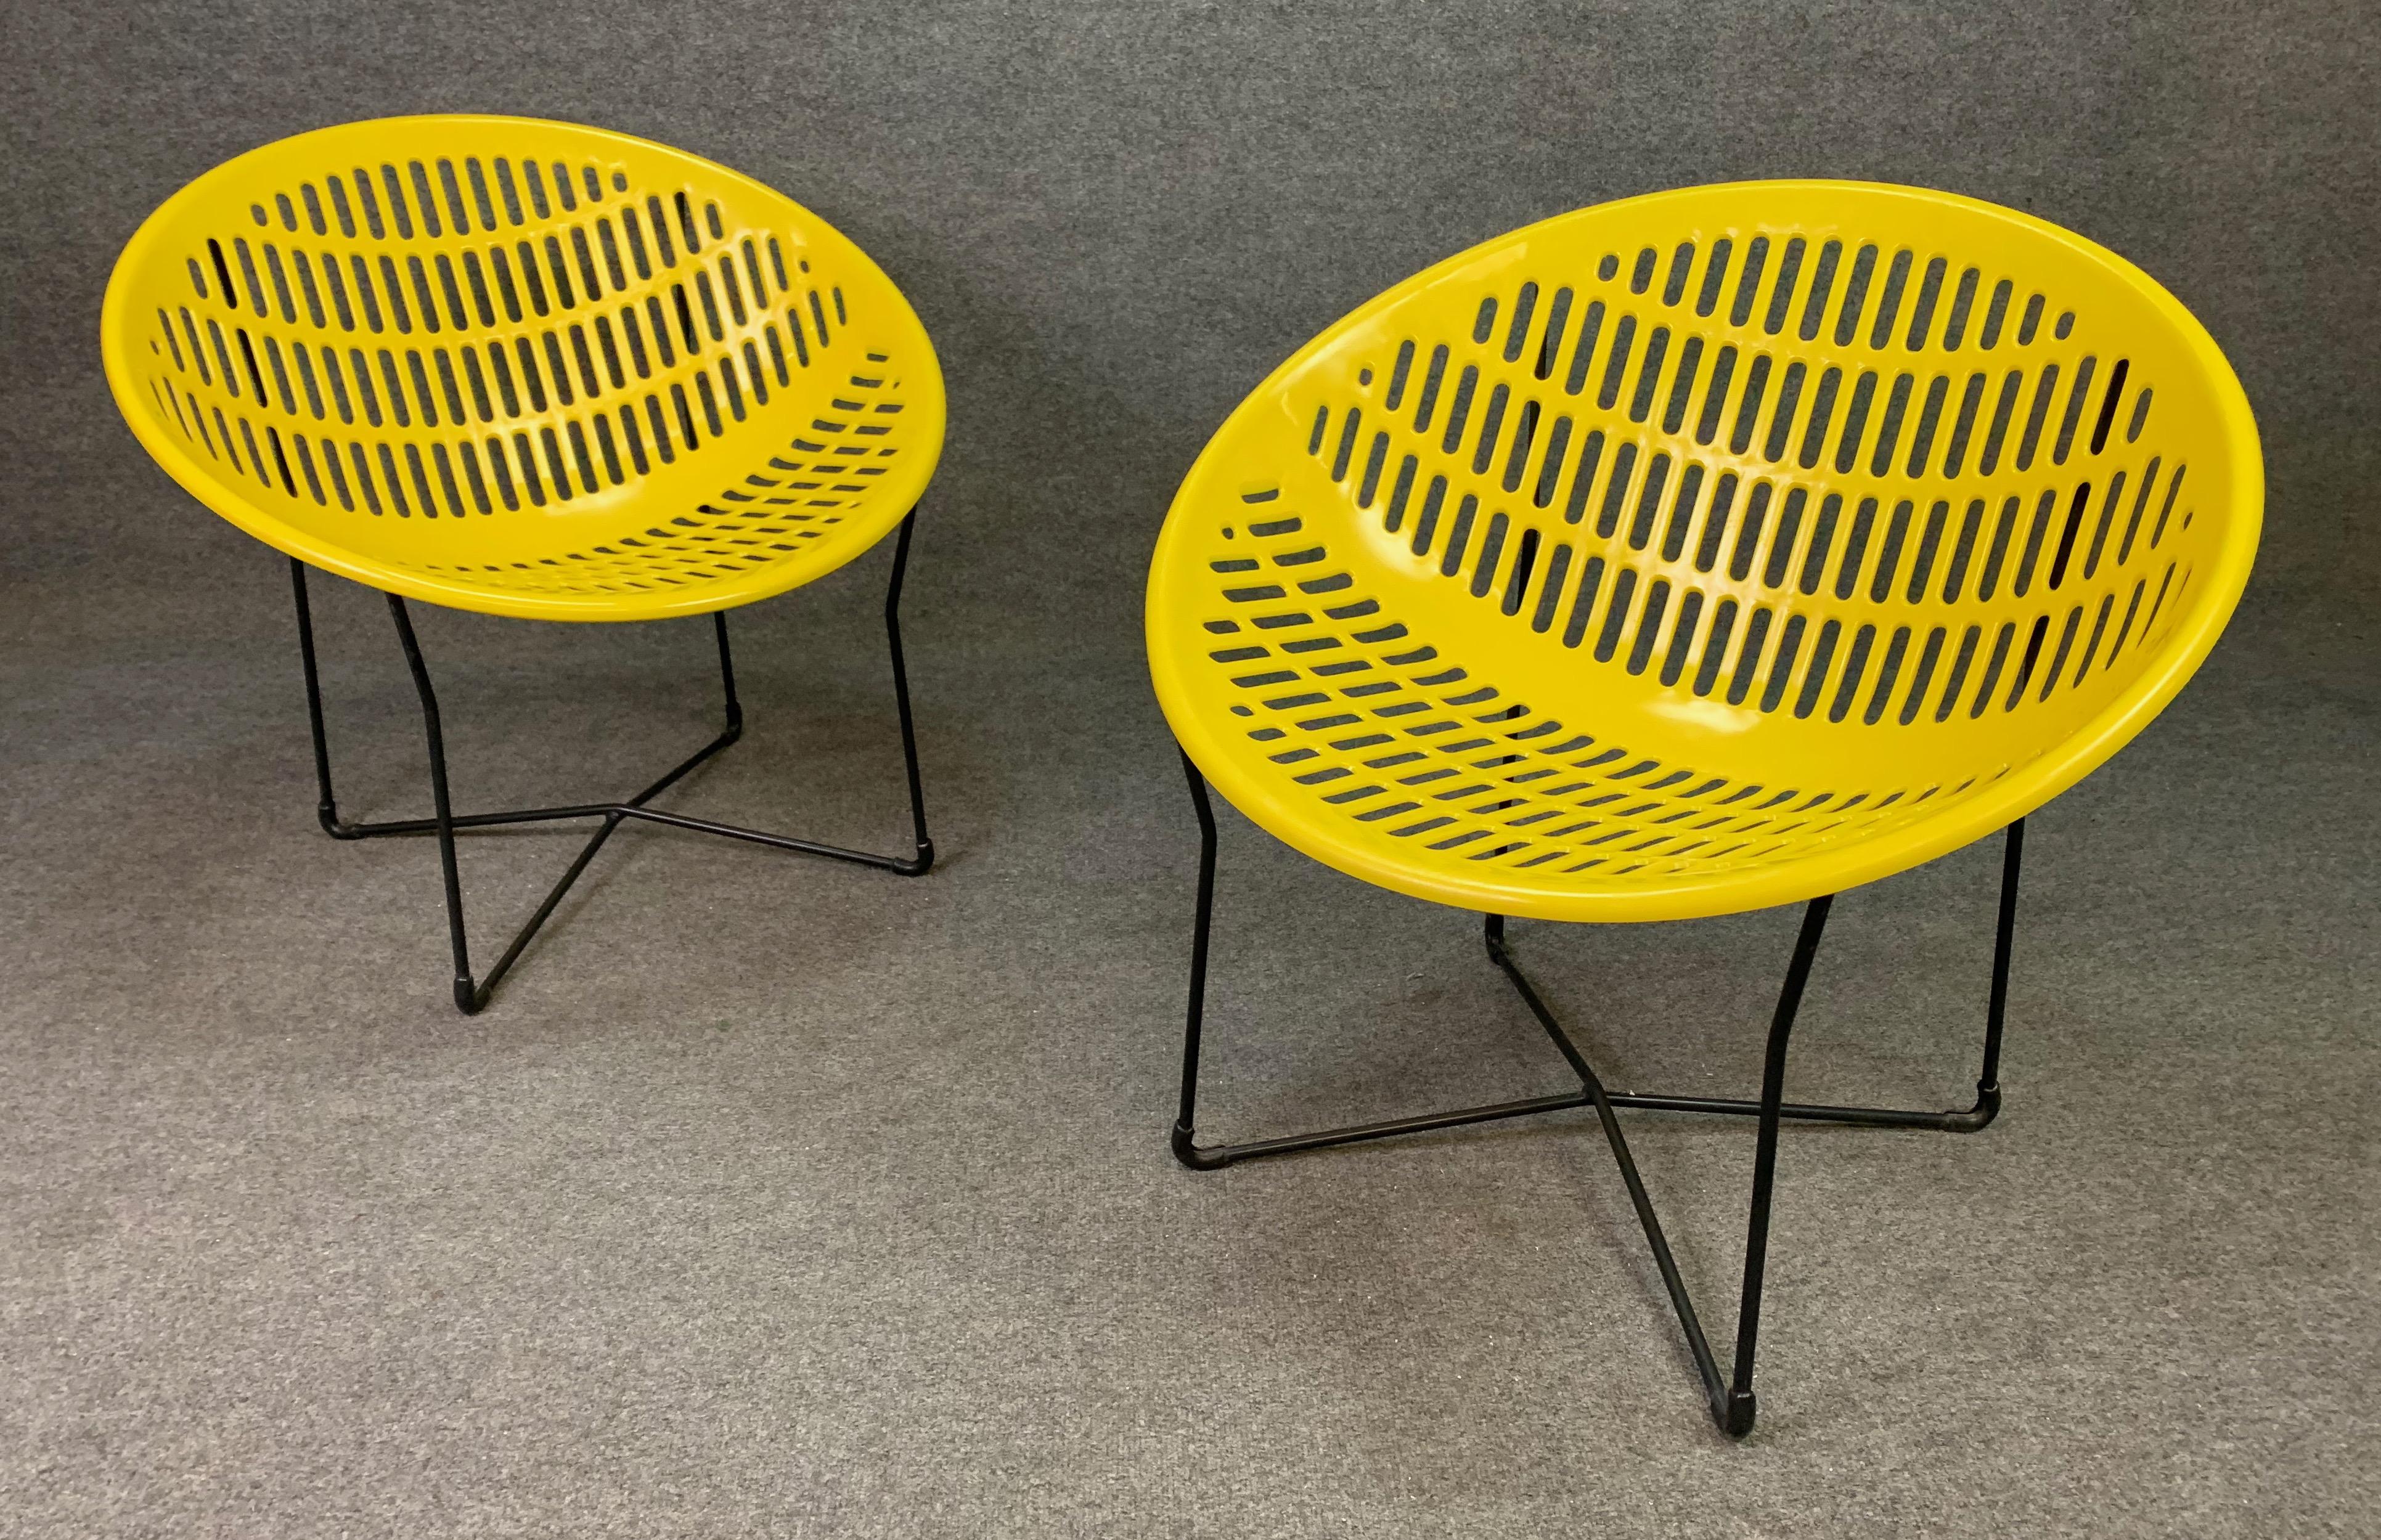 Here is a pair of vintage and iconic patio furniture; the 